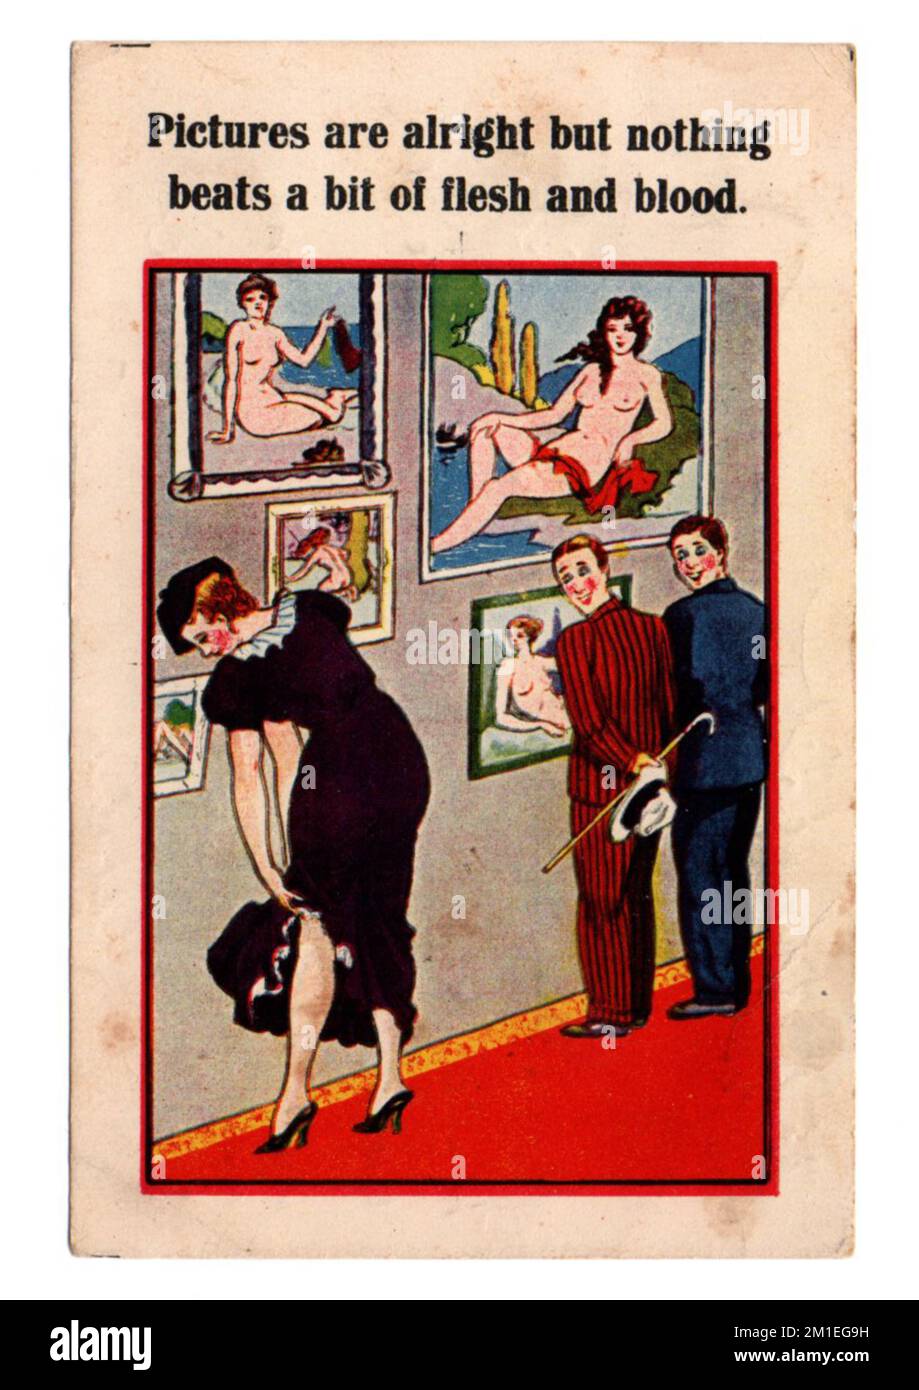 vintage Comic postcard from 1947 'Pictures Are Alright But Nothing Beats A Bit Of Flesh And Blood. vintage seaside humour. Stock Photo